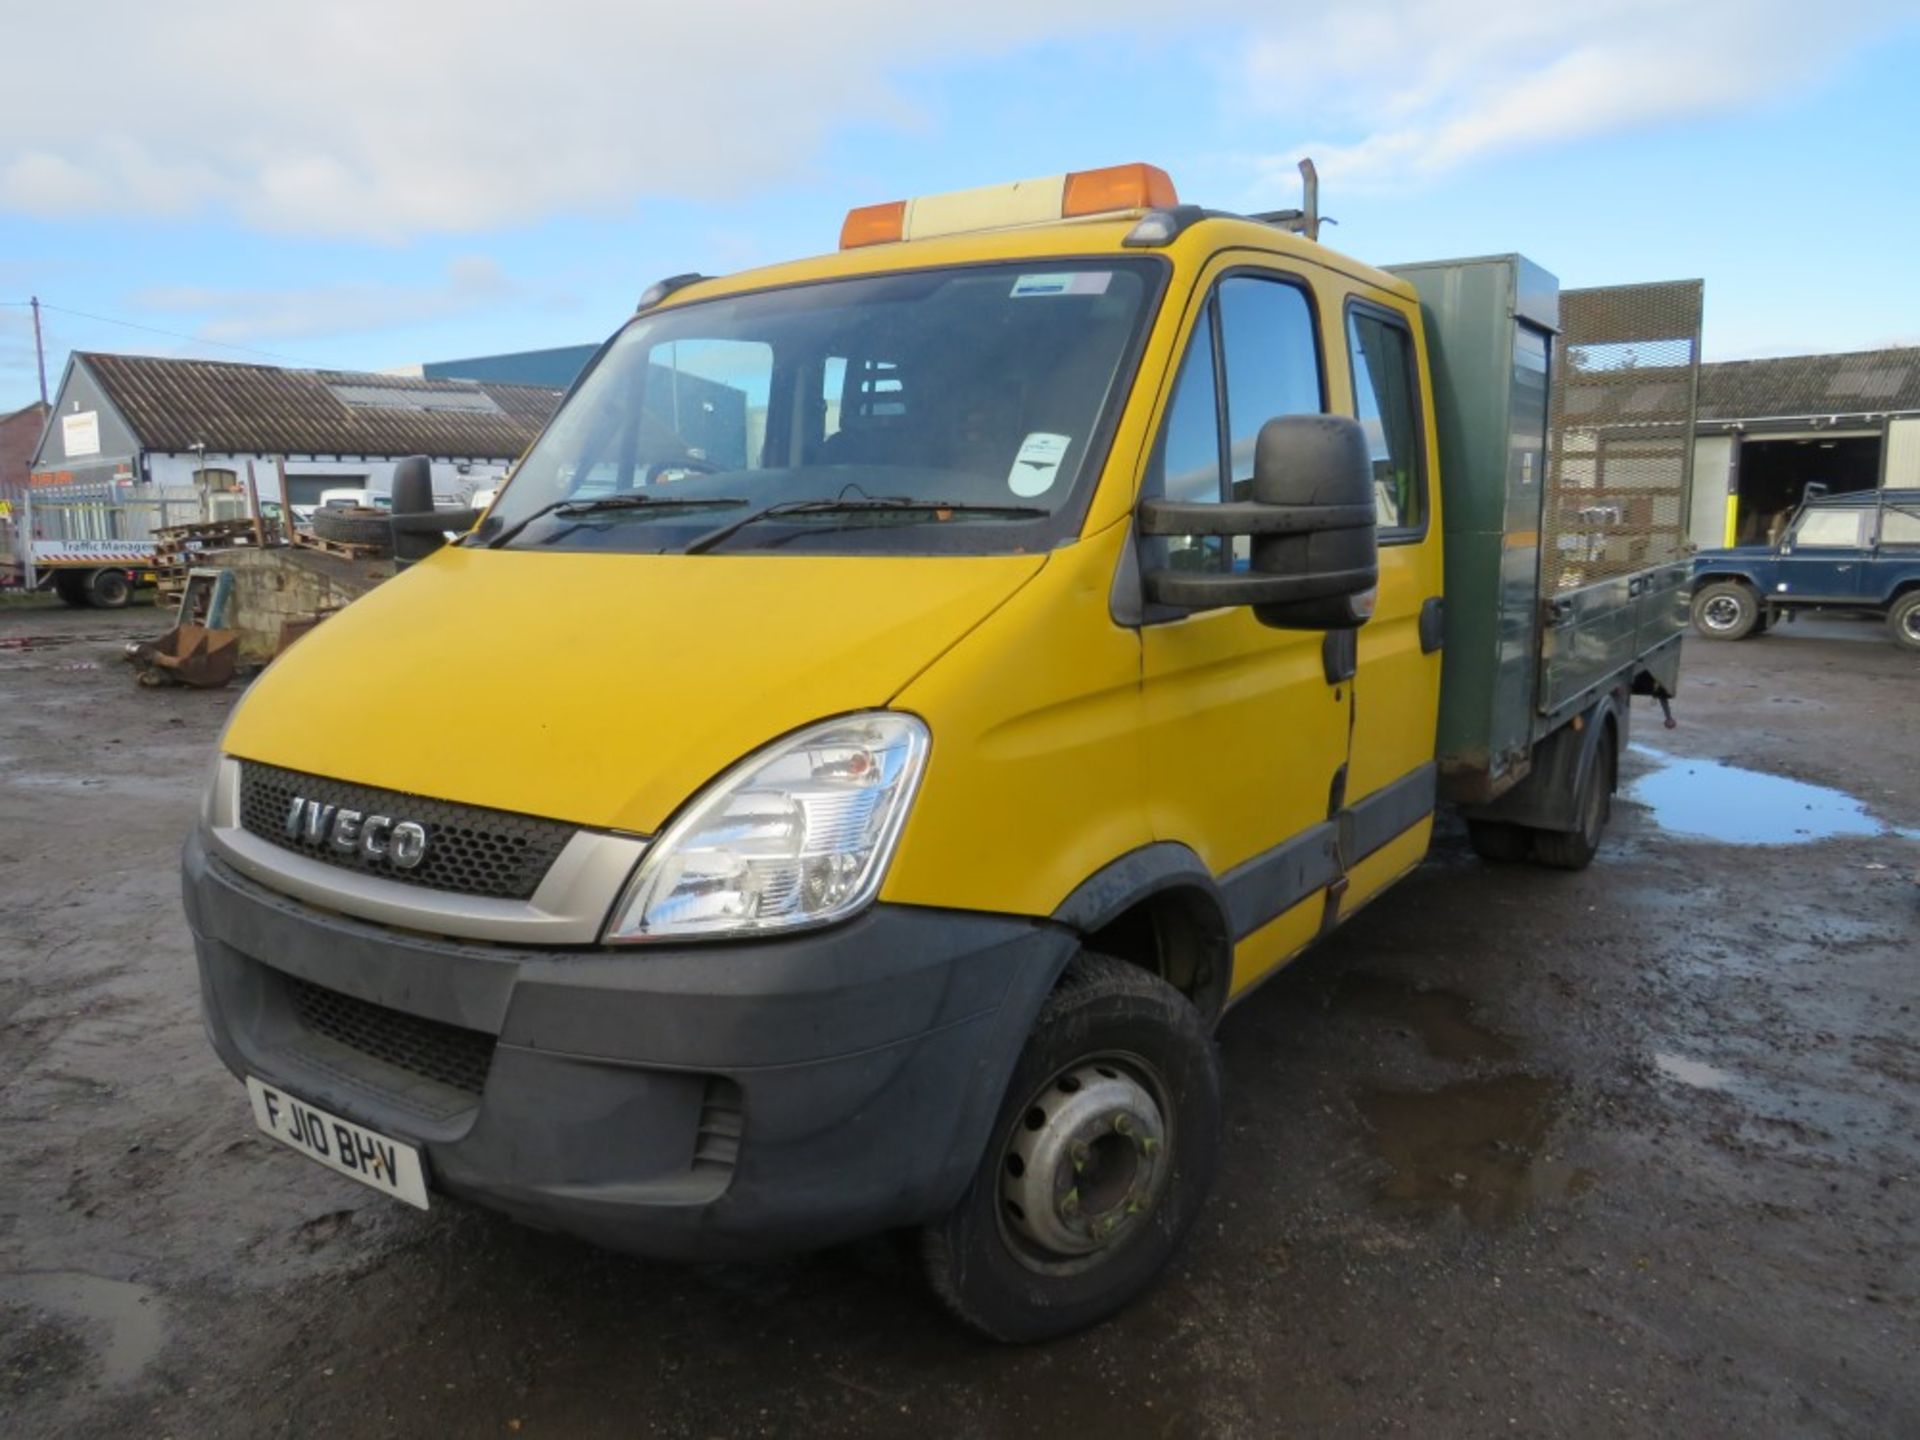 10 reg IVECO DAILY 60C18 BEAVERTAIL (DIRECT COUNCIL) 1ST REG 03/10, TEST 01/22, 70221M, V5 HERE, 1 - Image 2 of 6